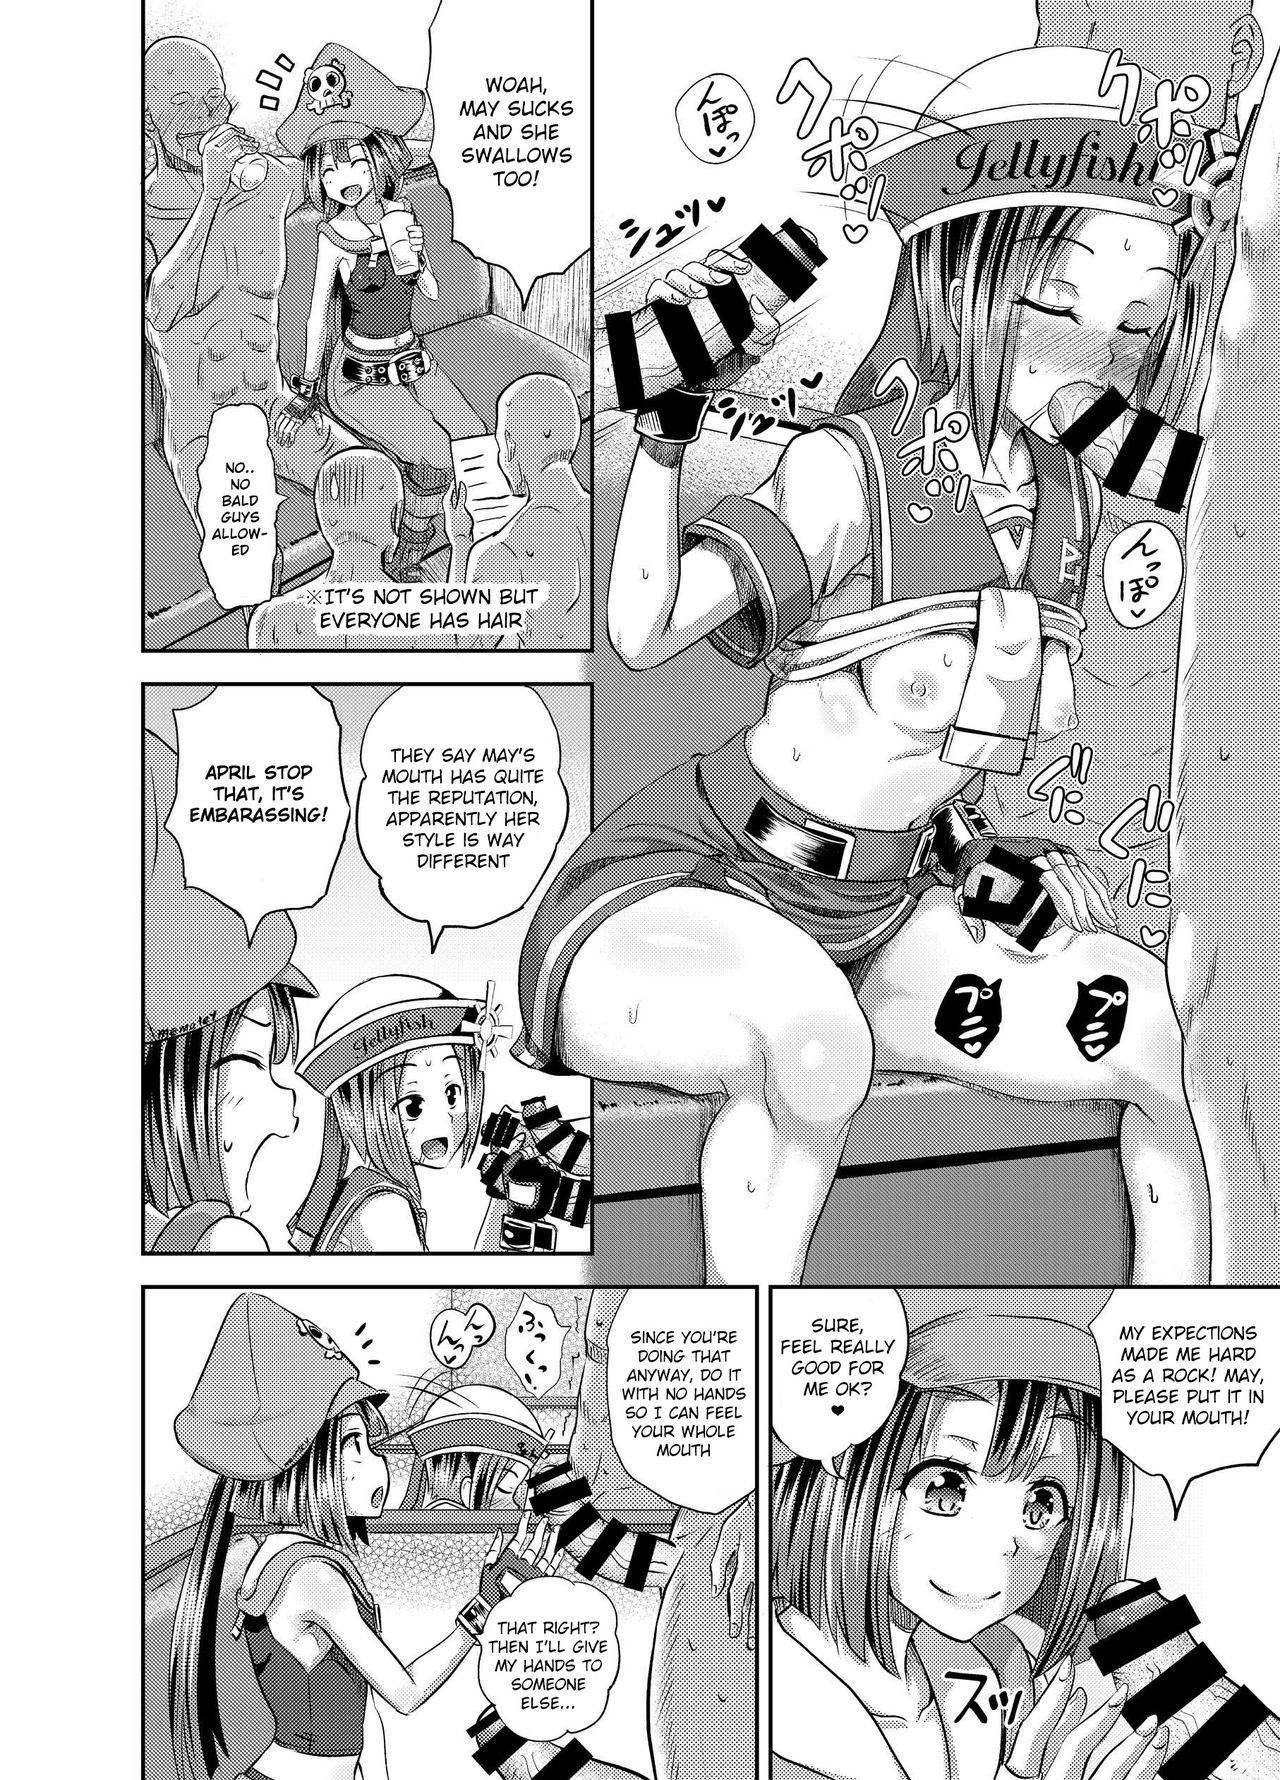 Lesbos Jellyfish Kaizokudan e Youkoso! | Welcome to The Jellyfish Pleasure Club! - Guilty gear Flogging - Page 5